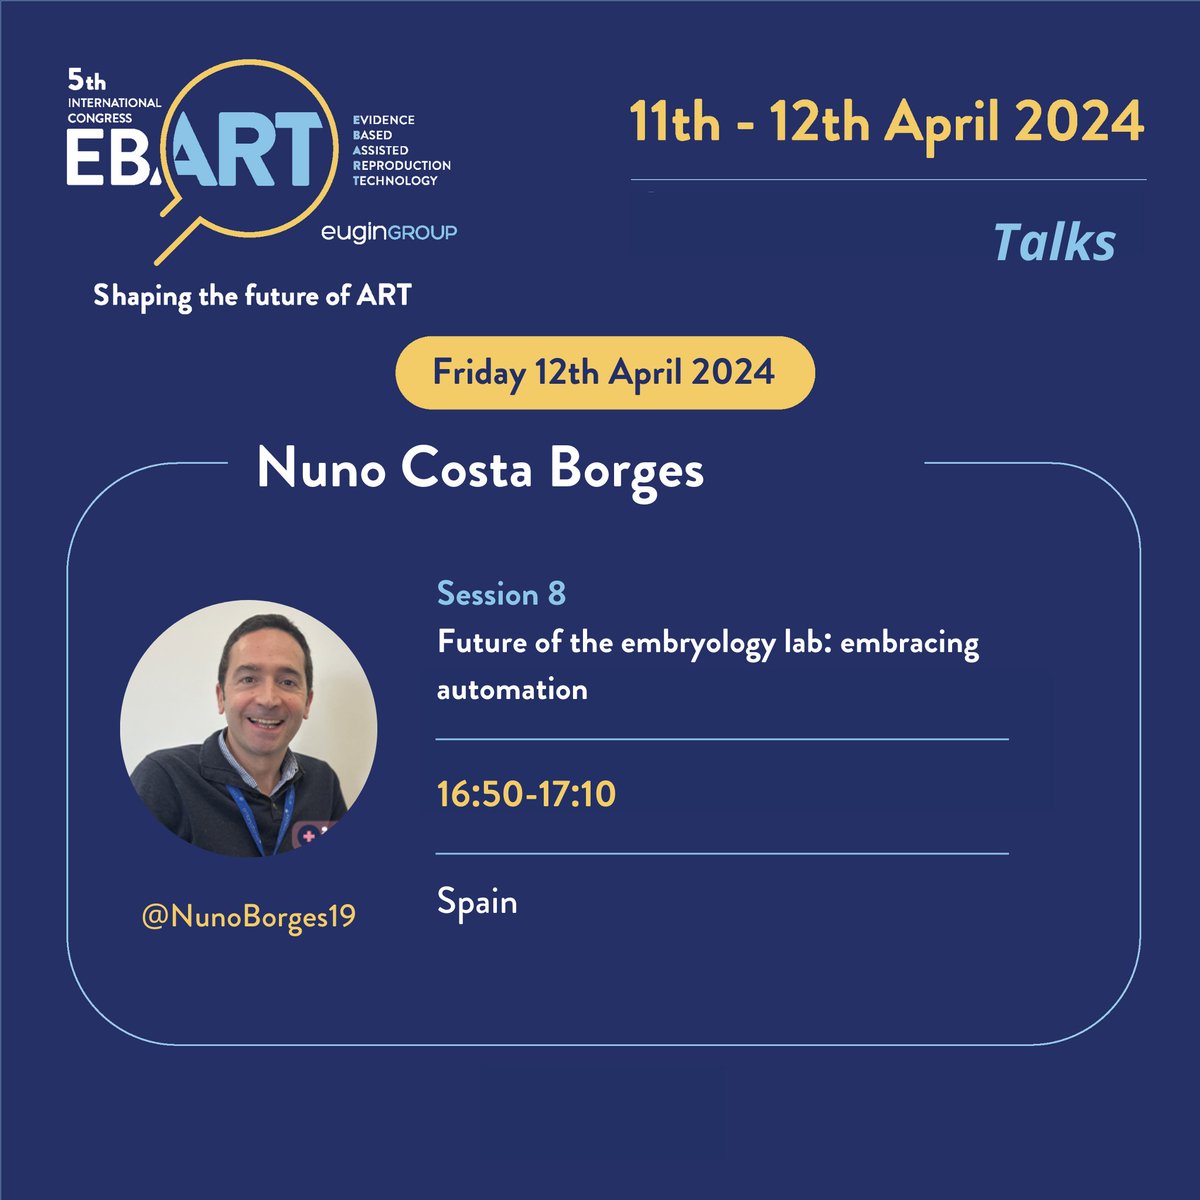 Dr. @NunoBorges19 is ready to present his super insightful talk on the future of the embryology lab. 'Why automation in #IVF?' Great having you here! #EBART2024